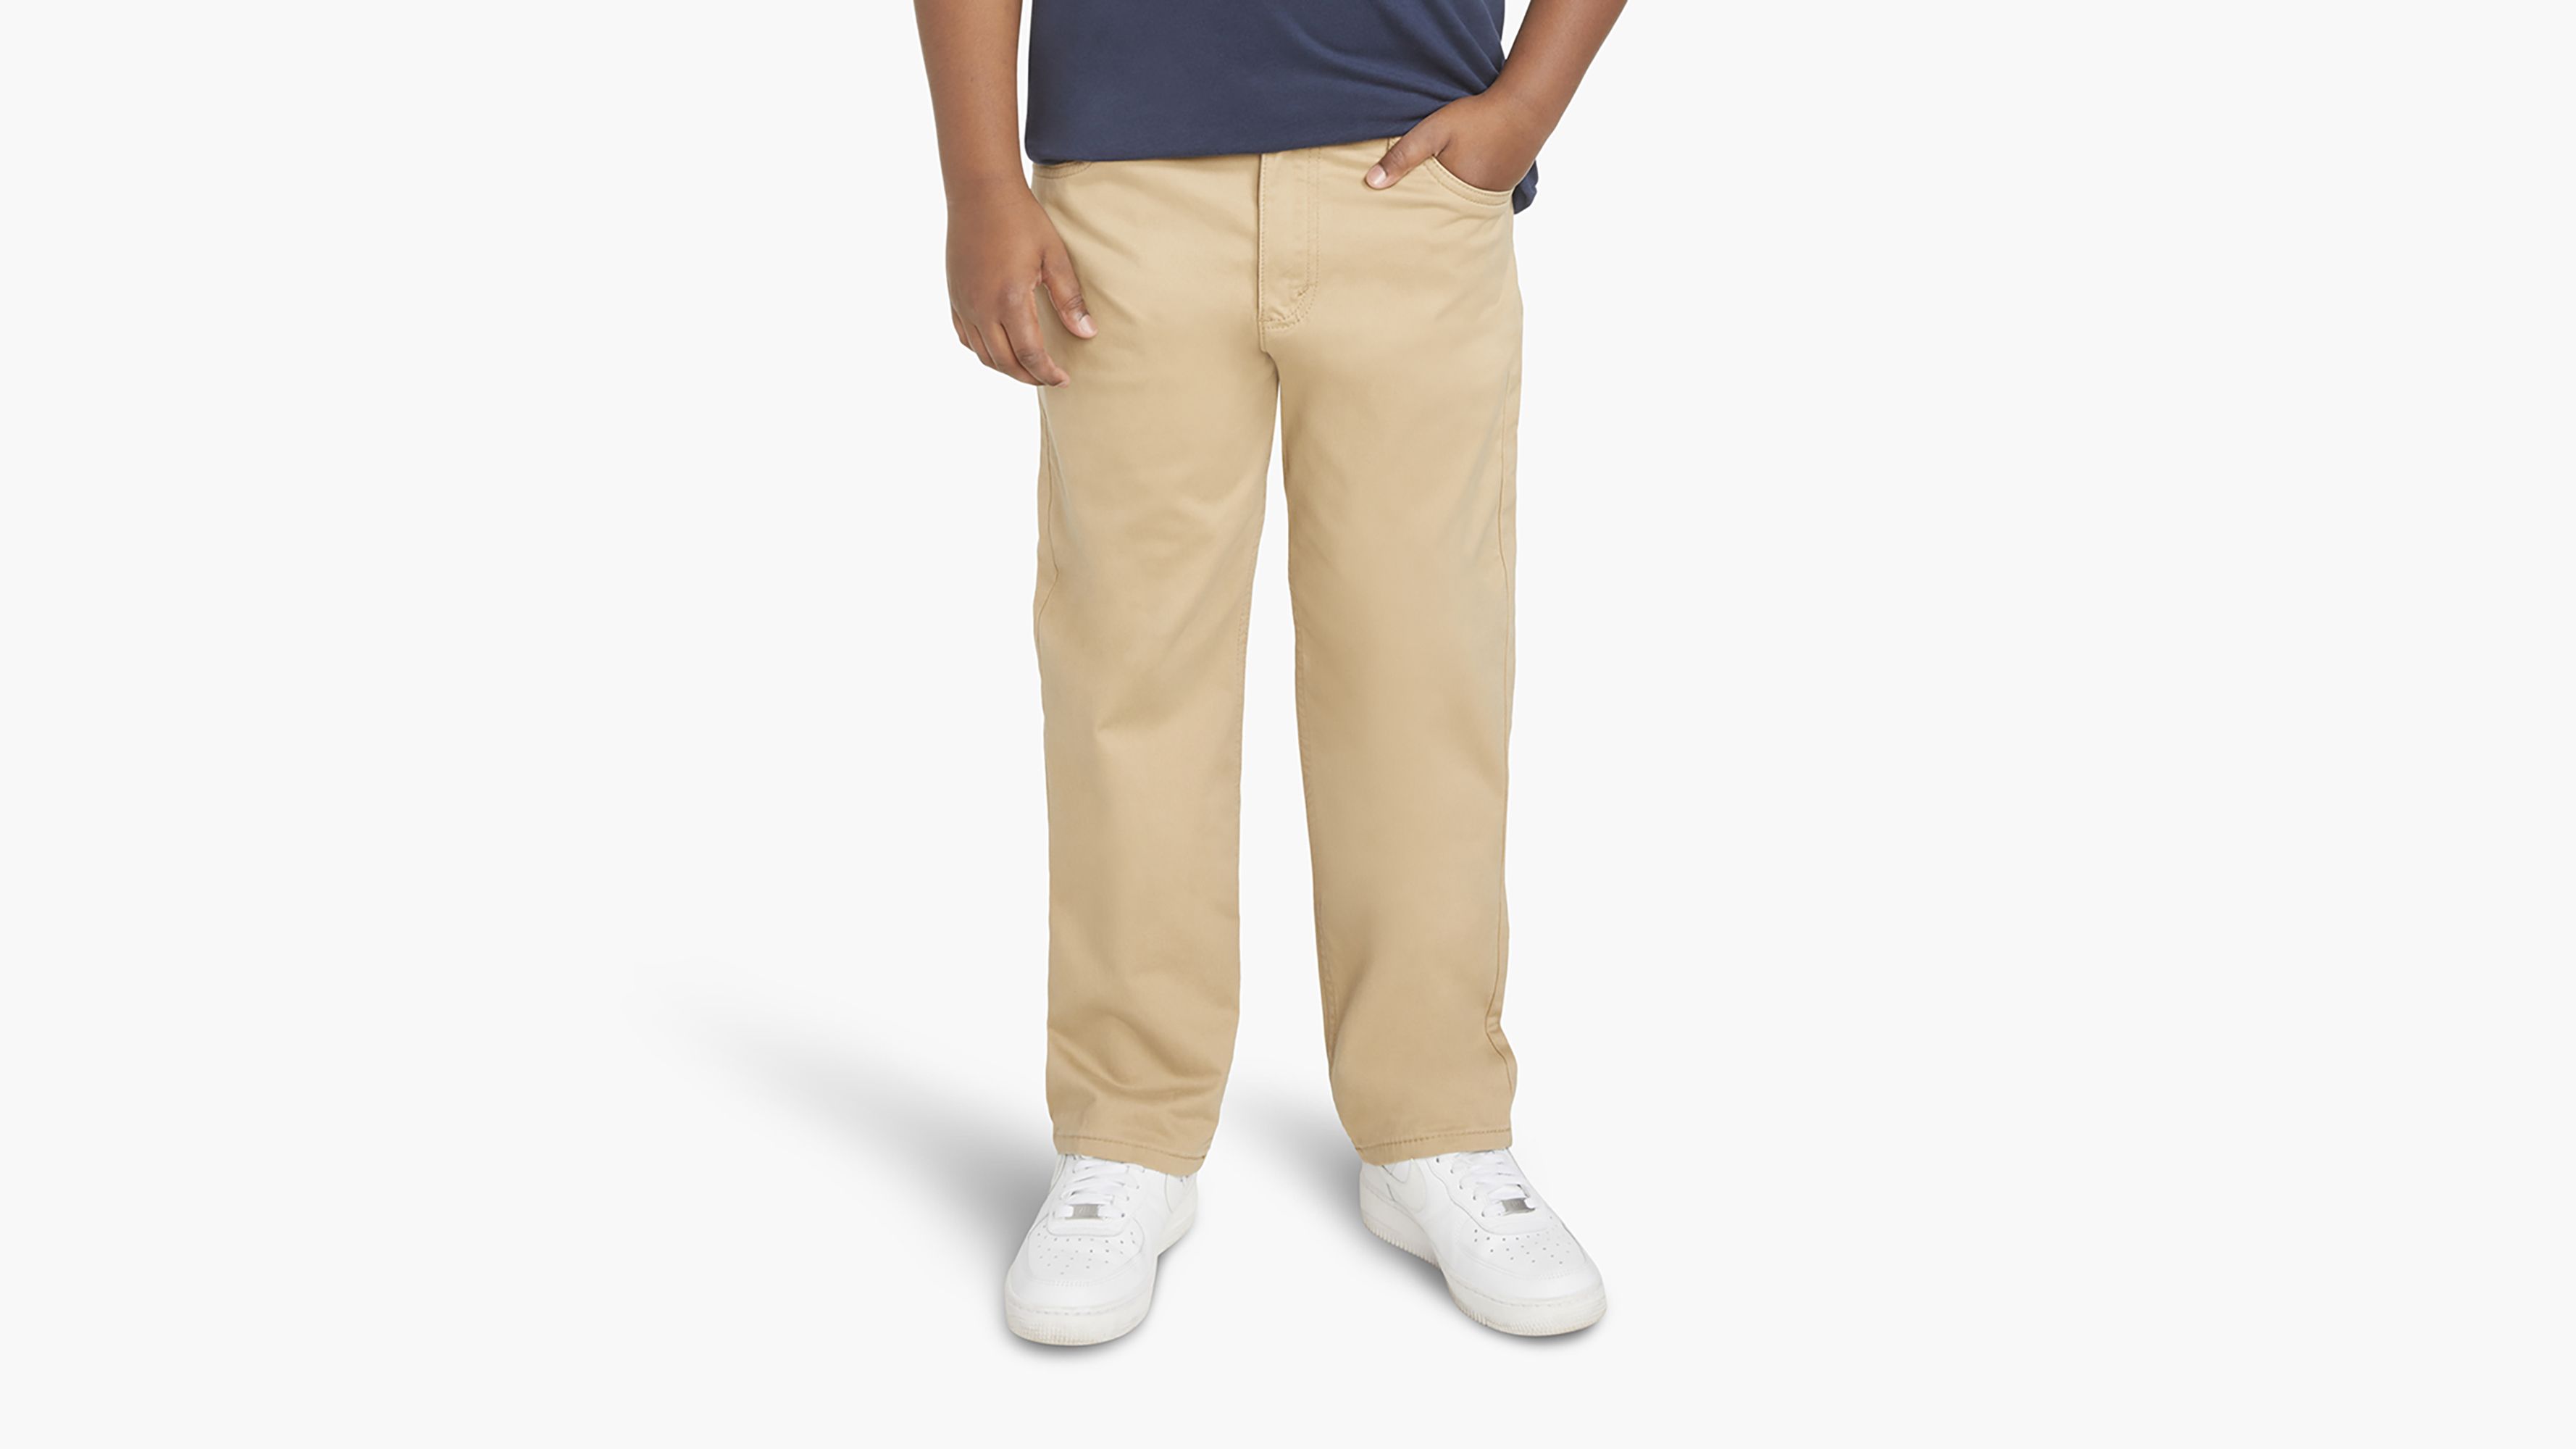 Buy United Colors of Benetton Boys Slim Casual Pants 4DN10ECOMIBlue2 3  Years at Amazonin